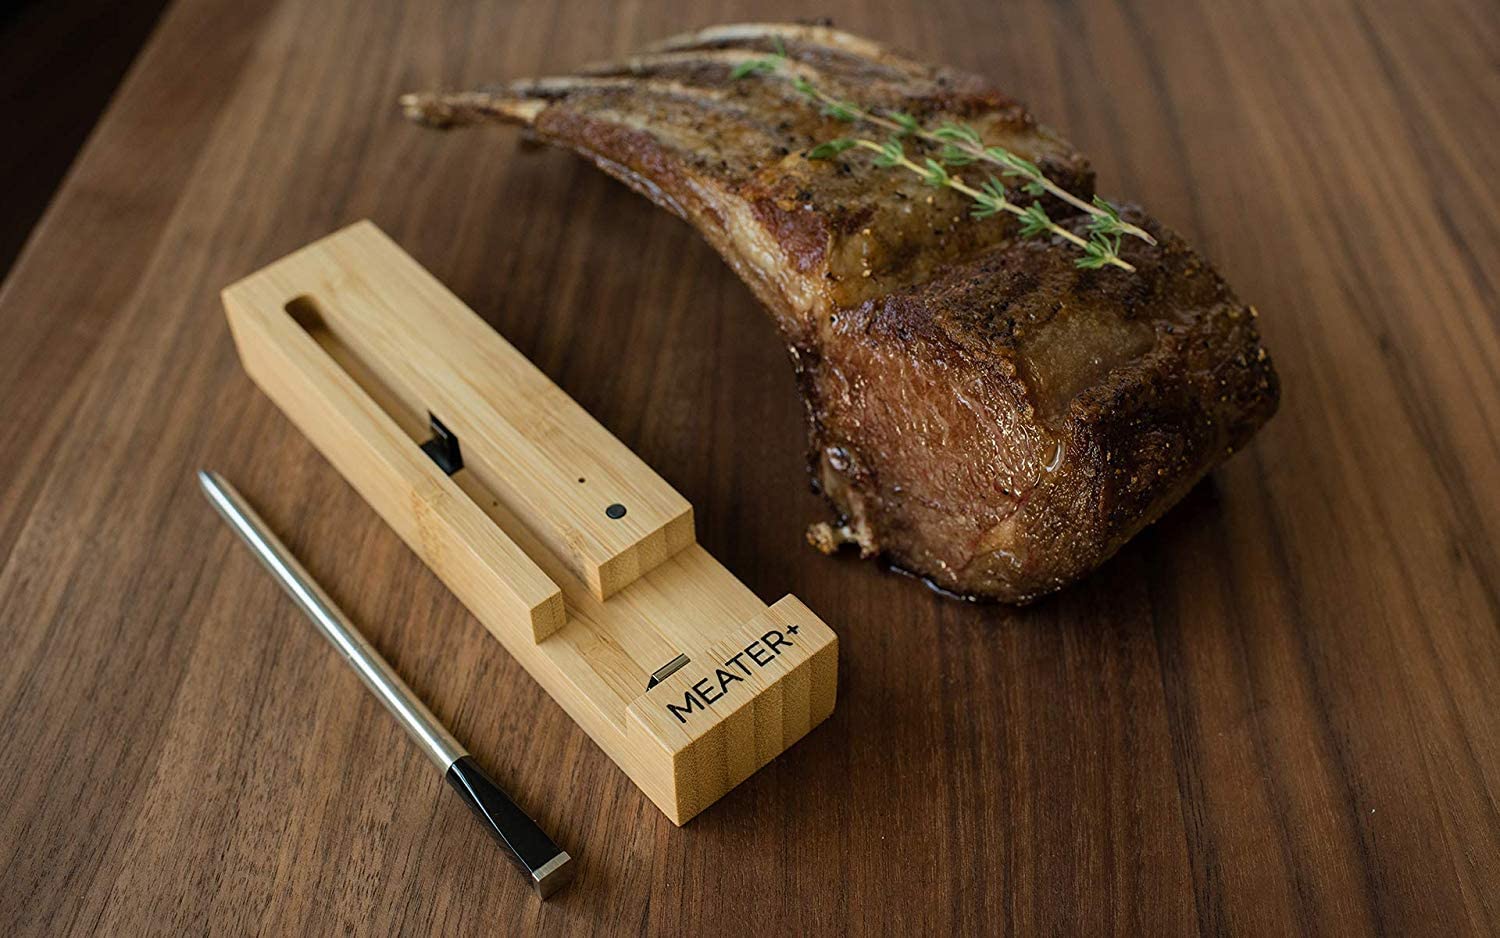 MEATER Plus, Wireless Smart Meat Thermometer